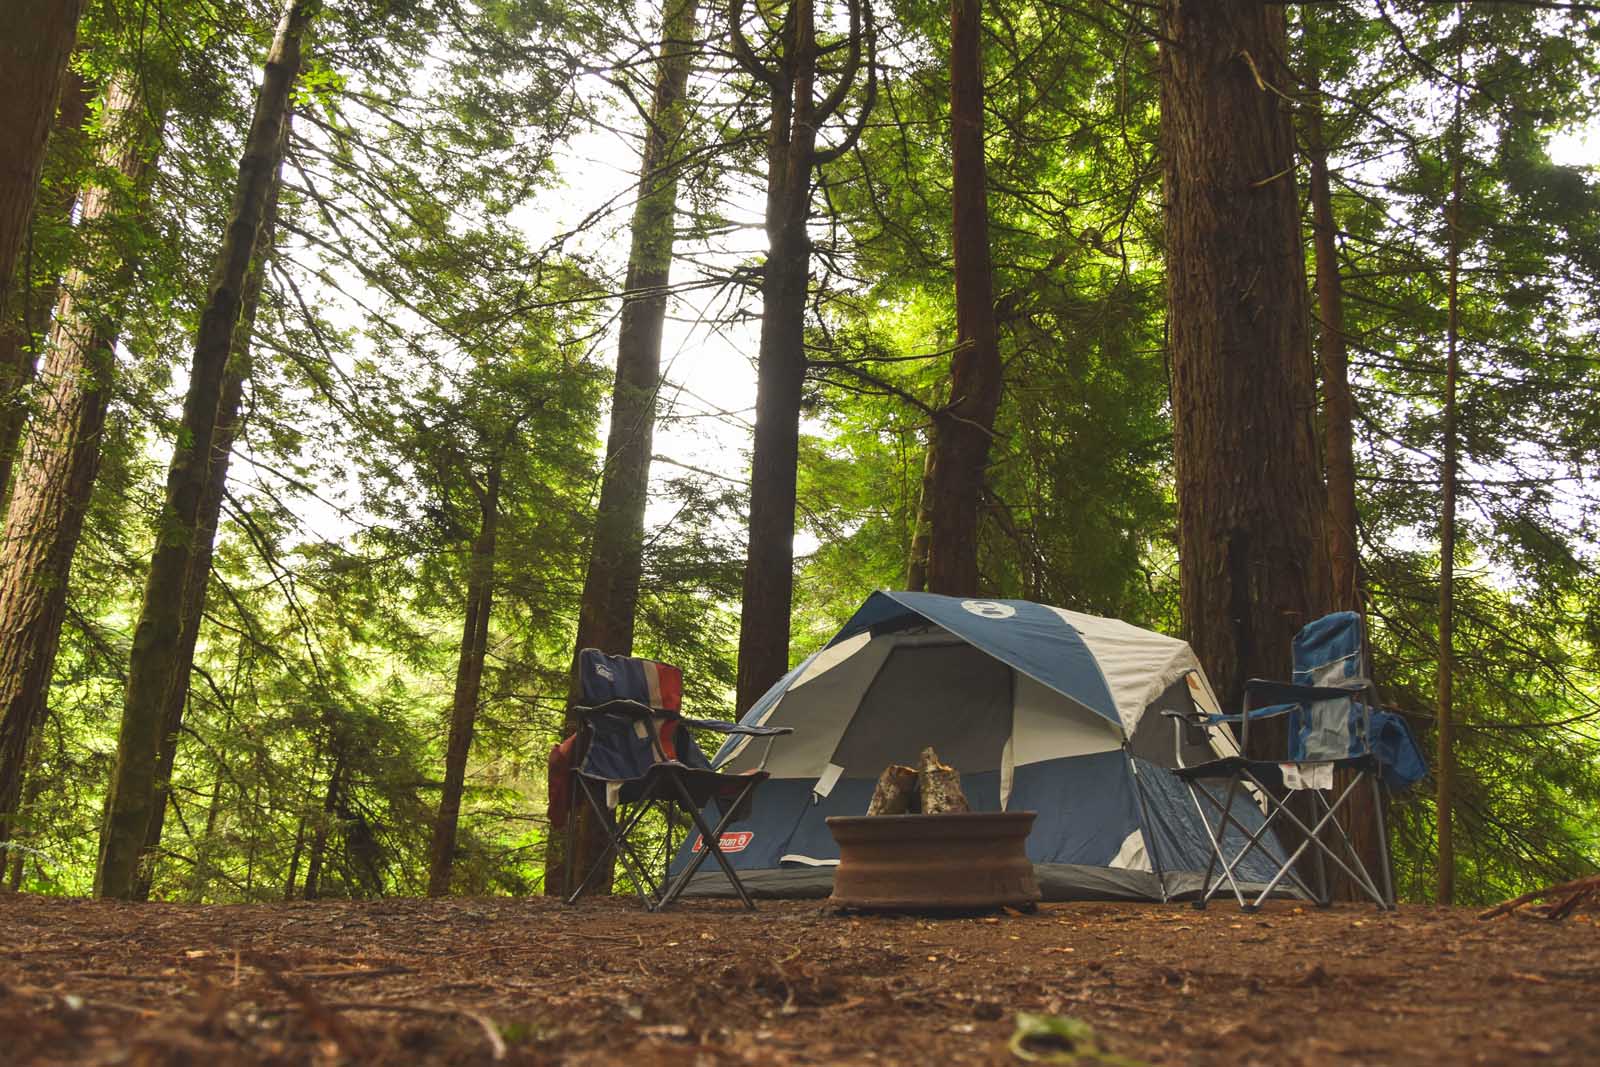 What to pack for Redwood National Park